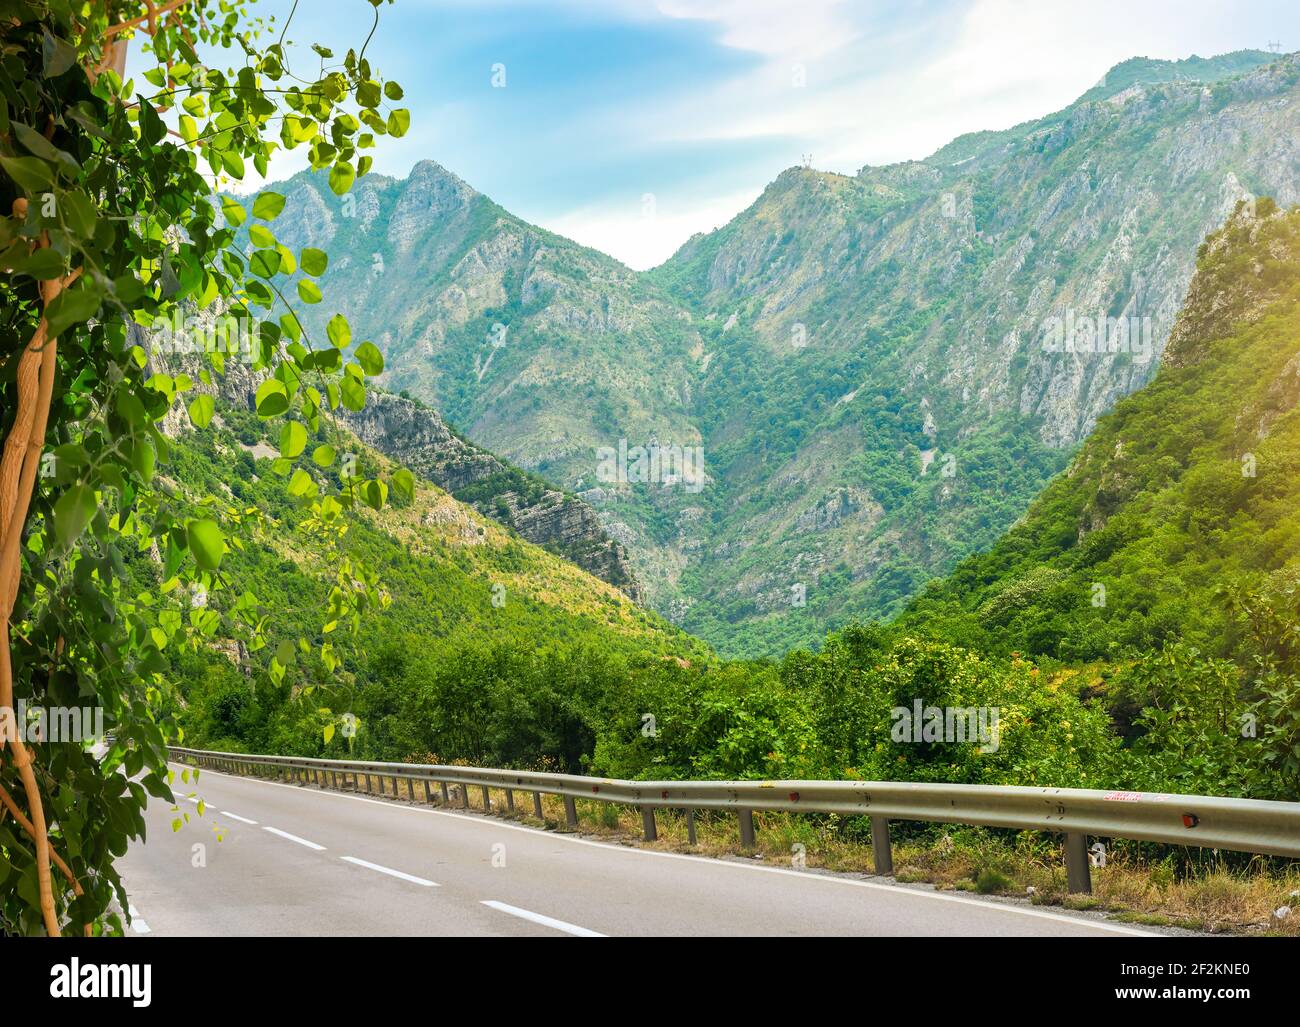 Landscape with the image of mountain road in Montenegro Stock Photo